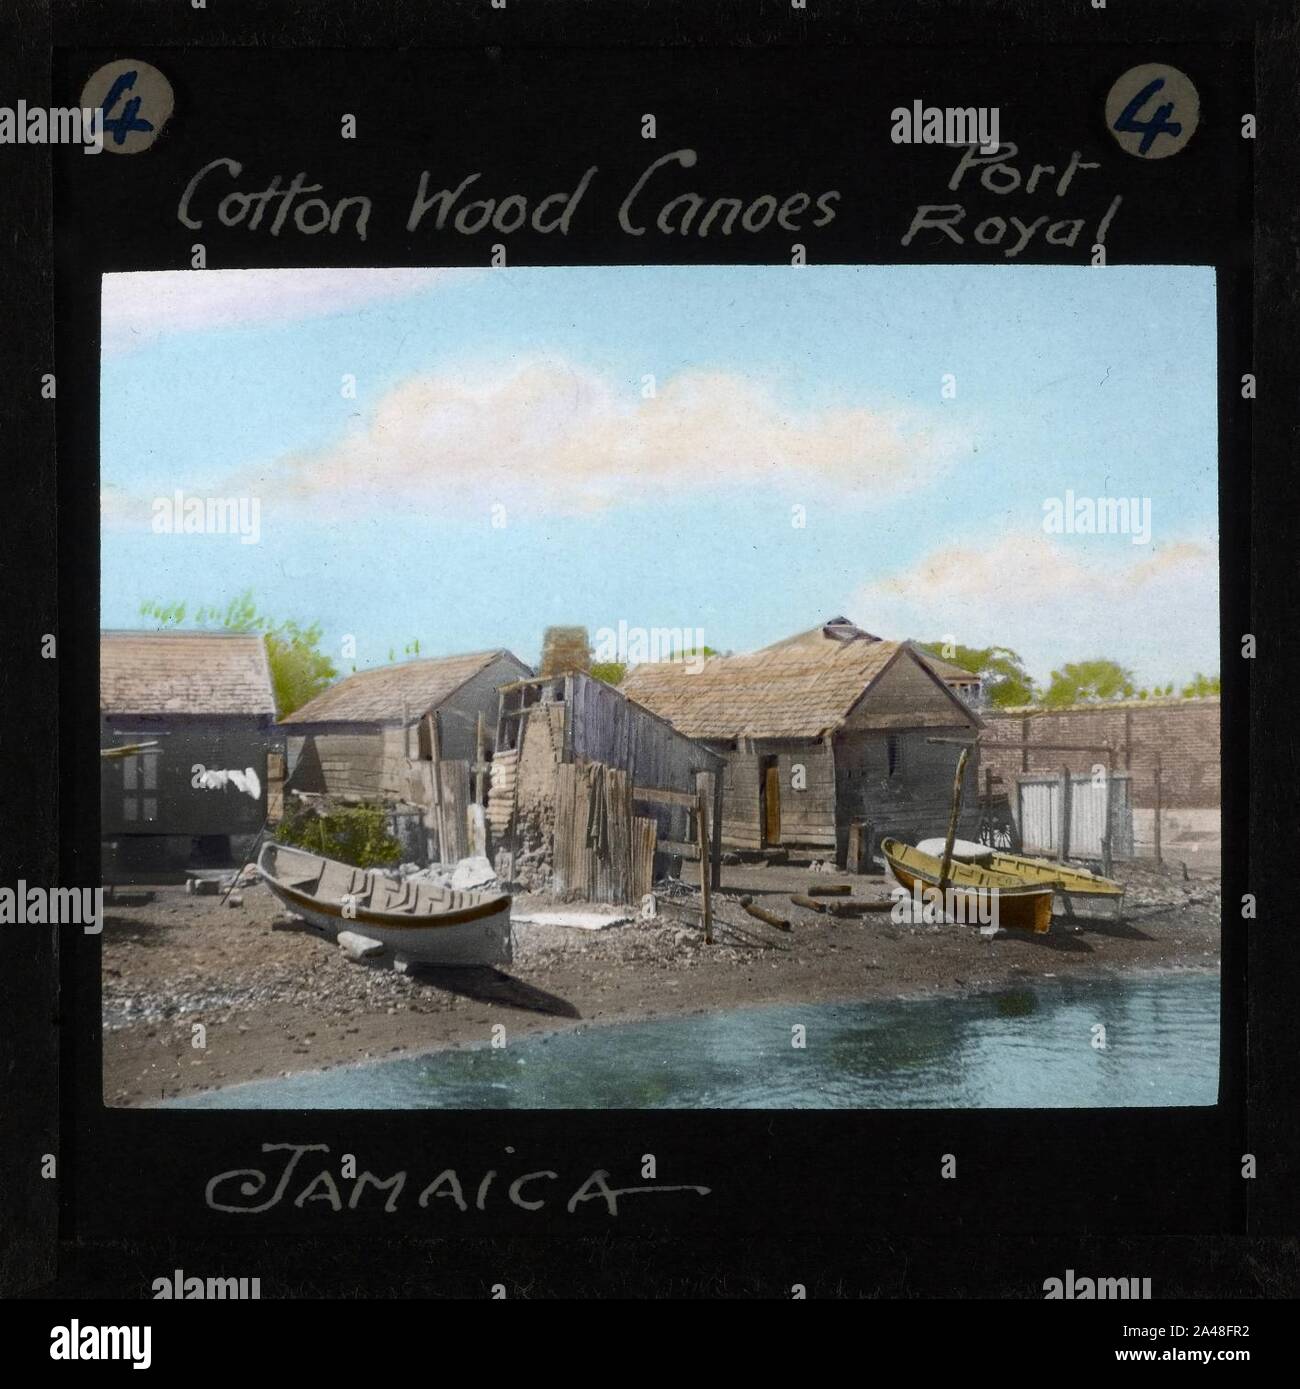 Fisherman's Shacks and Cotton-wood Canoes, Port Royal (imp-cswc-GB-237-CSWC47-LS12-004). Stock Photo